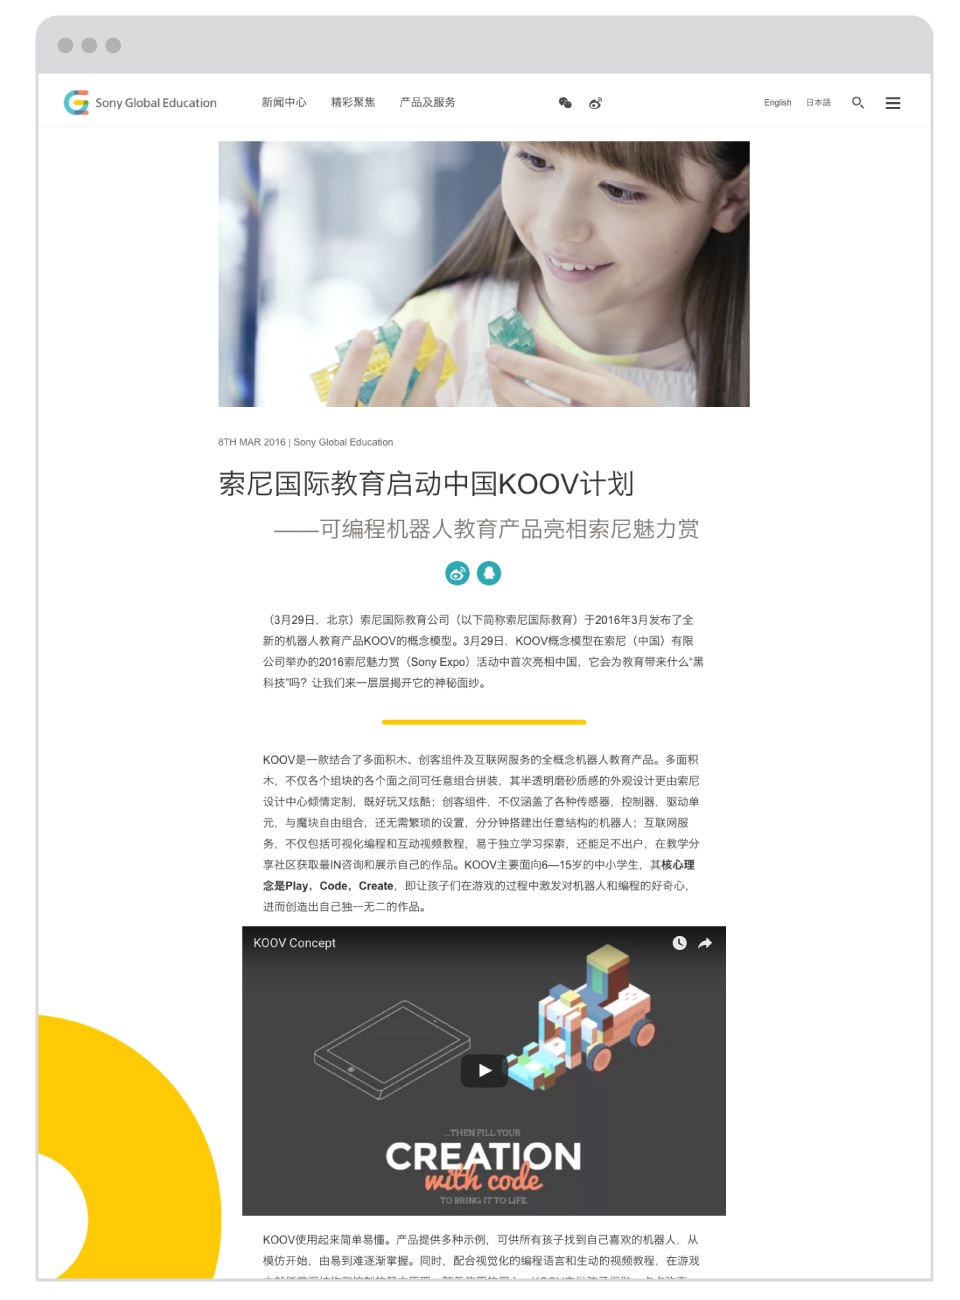 Sony Global Education - Sony Global Education - Japanese Article Page